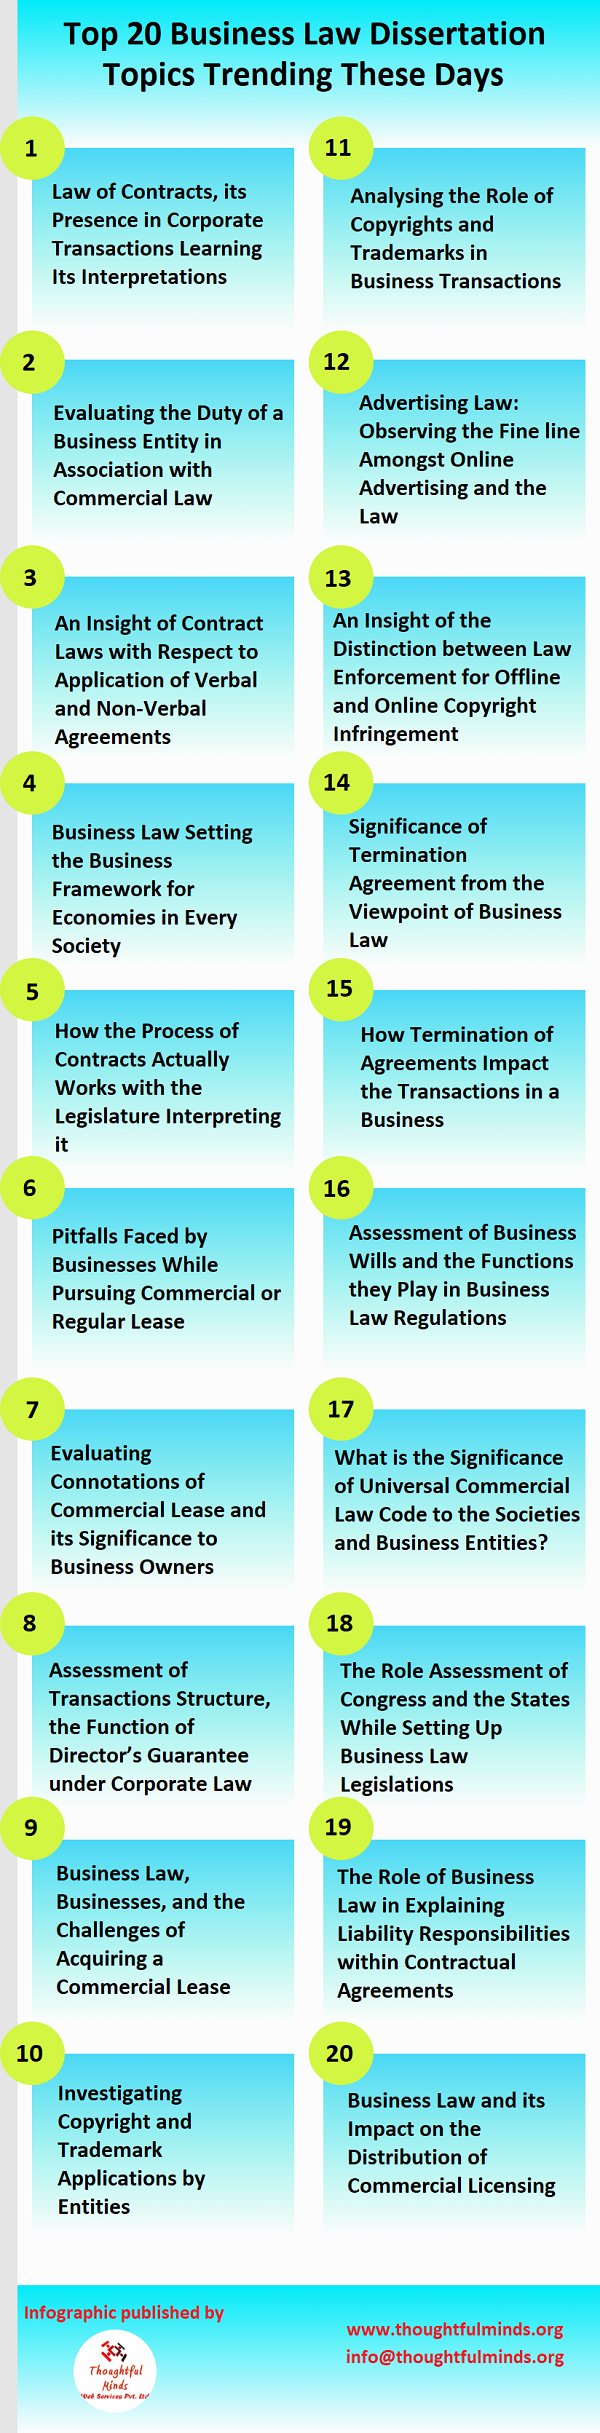 research topics for business law